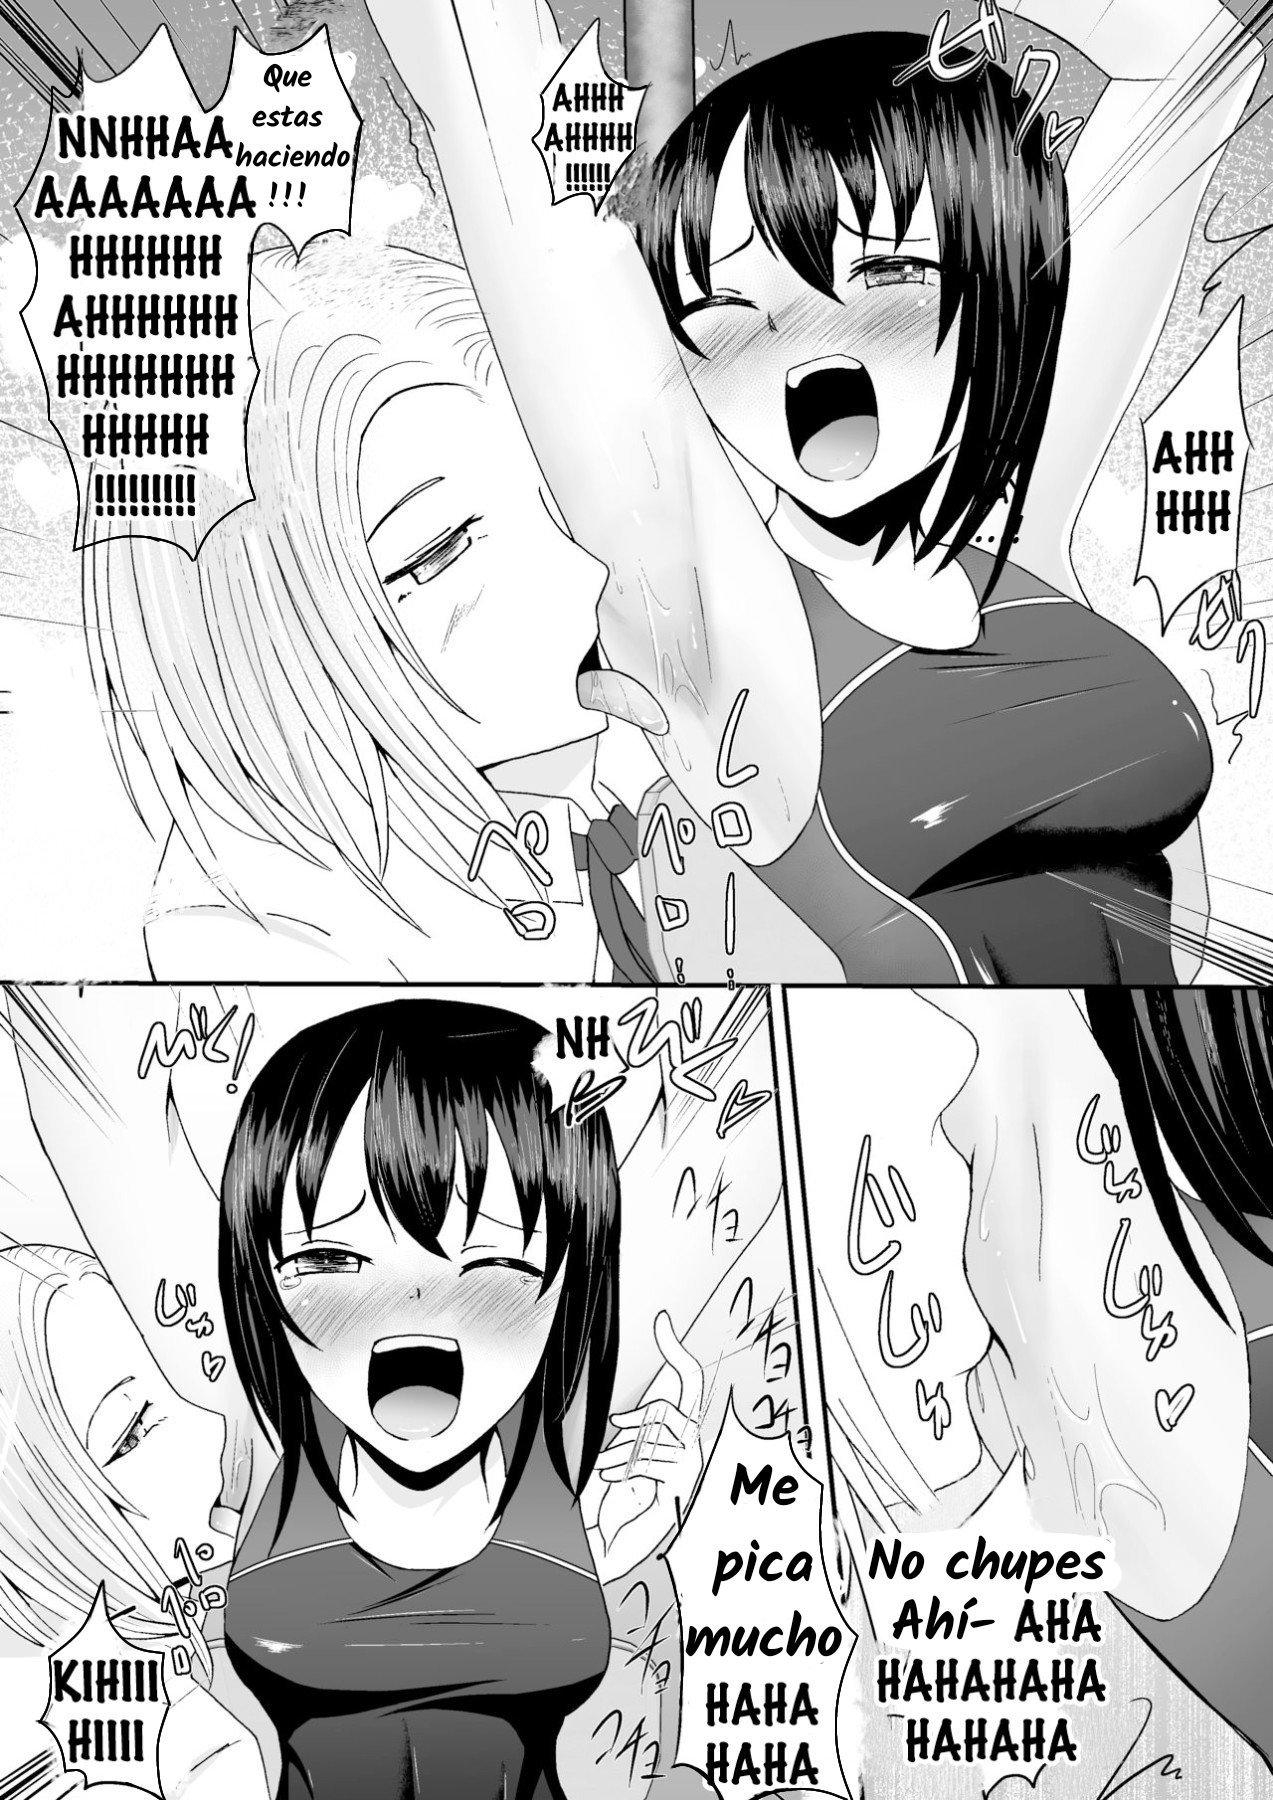 The Swimsuit Girs Ticklish Weapons - 24